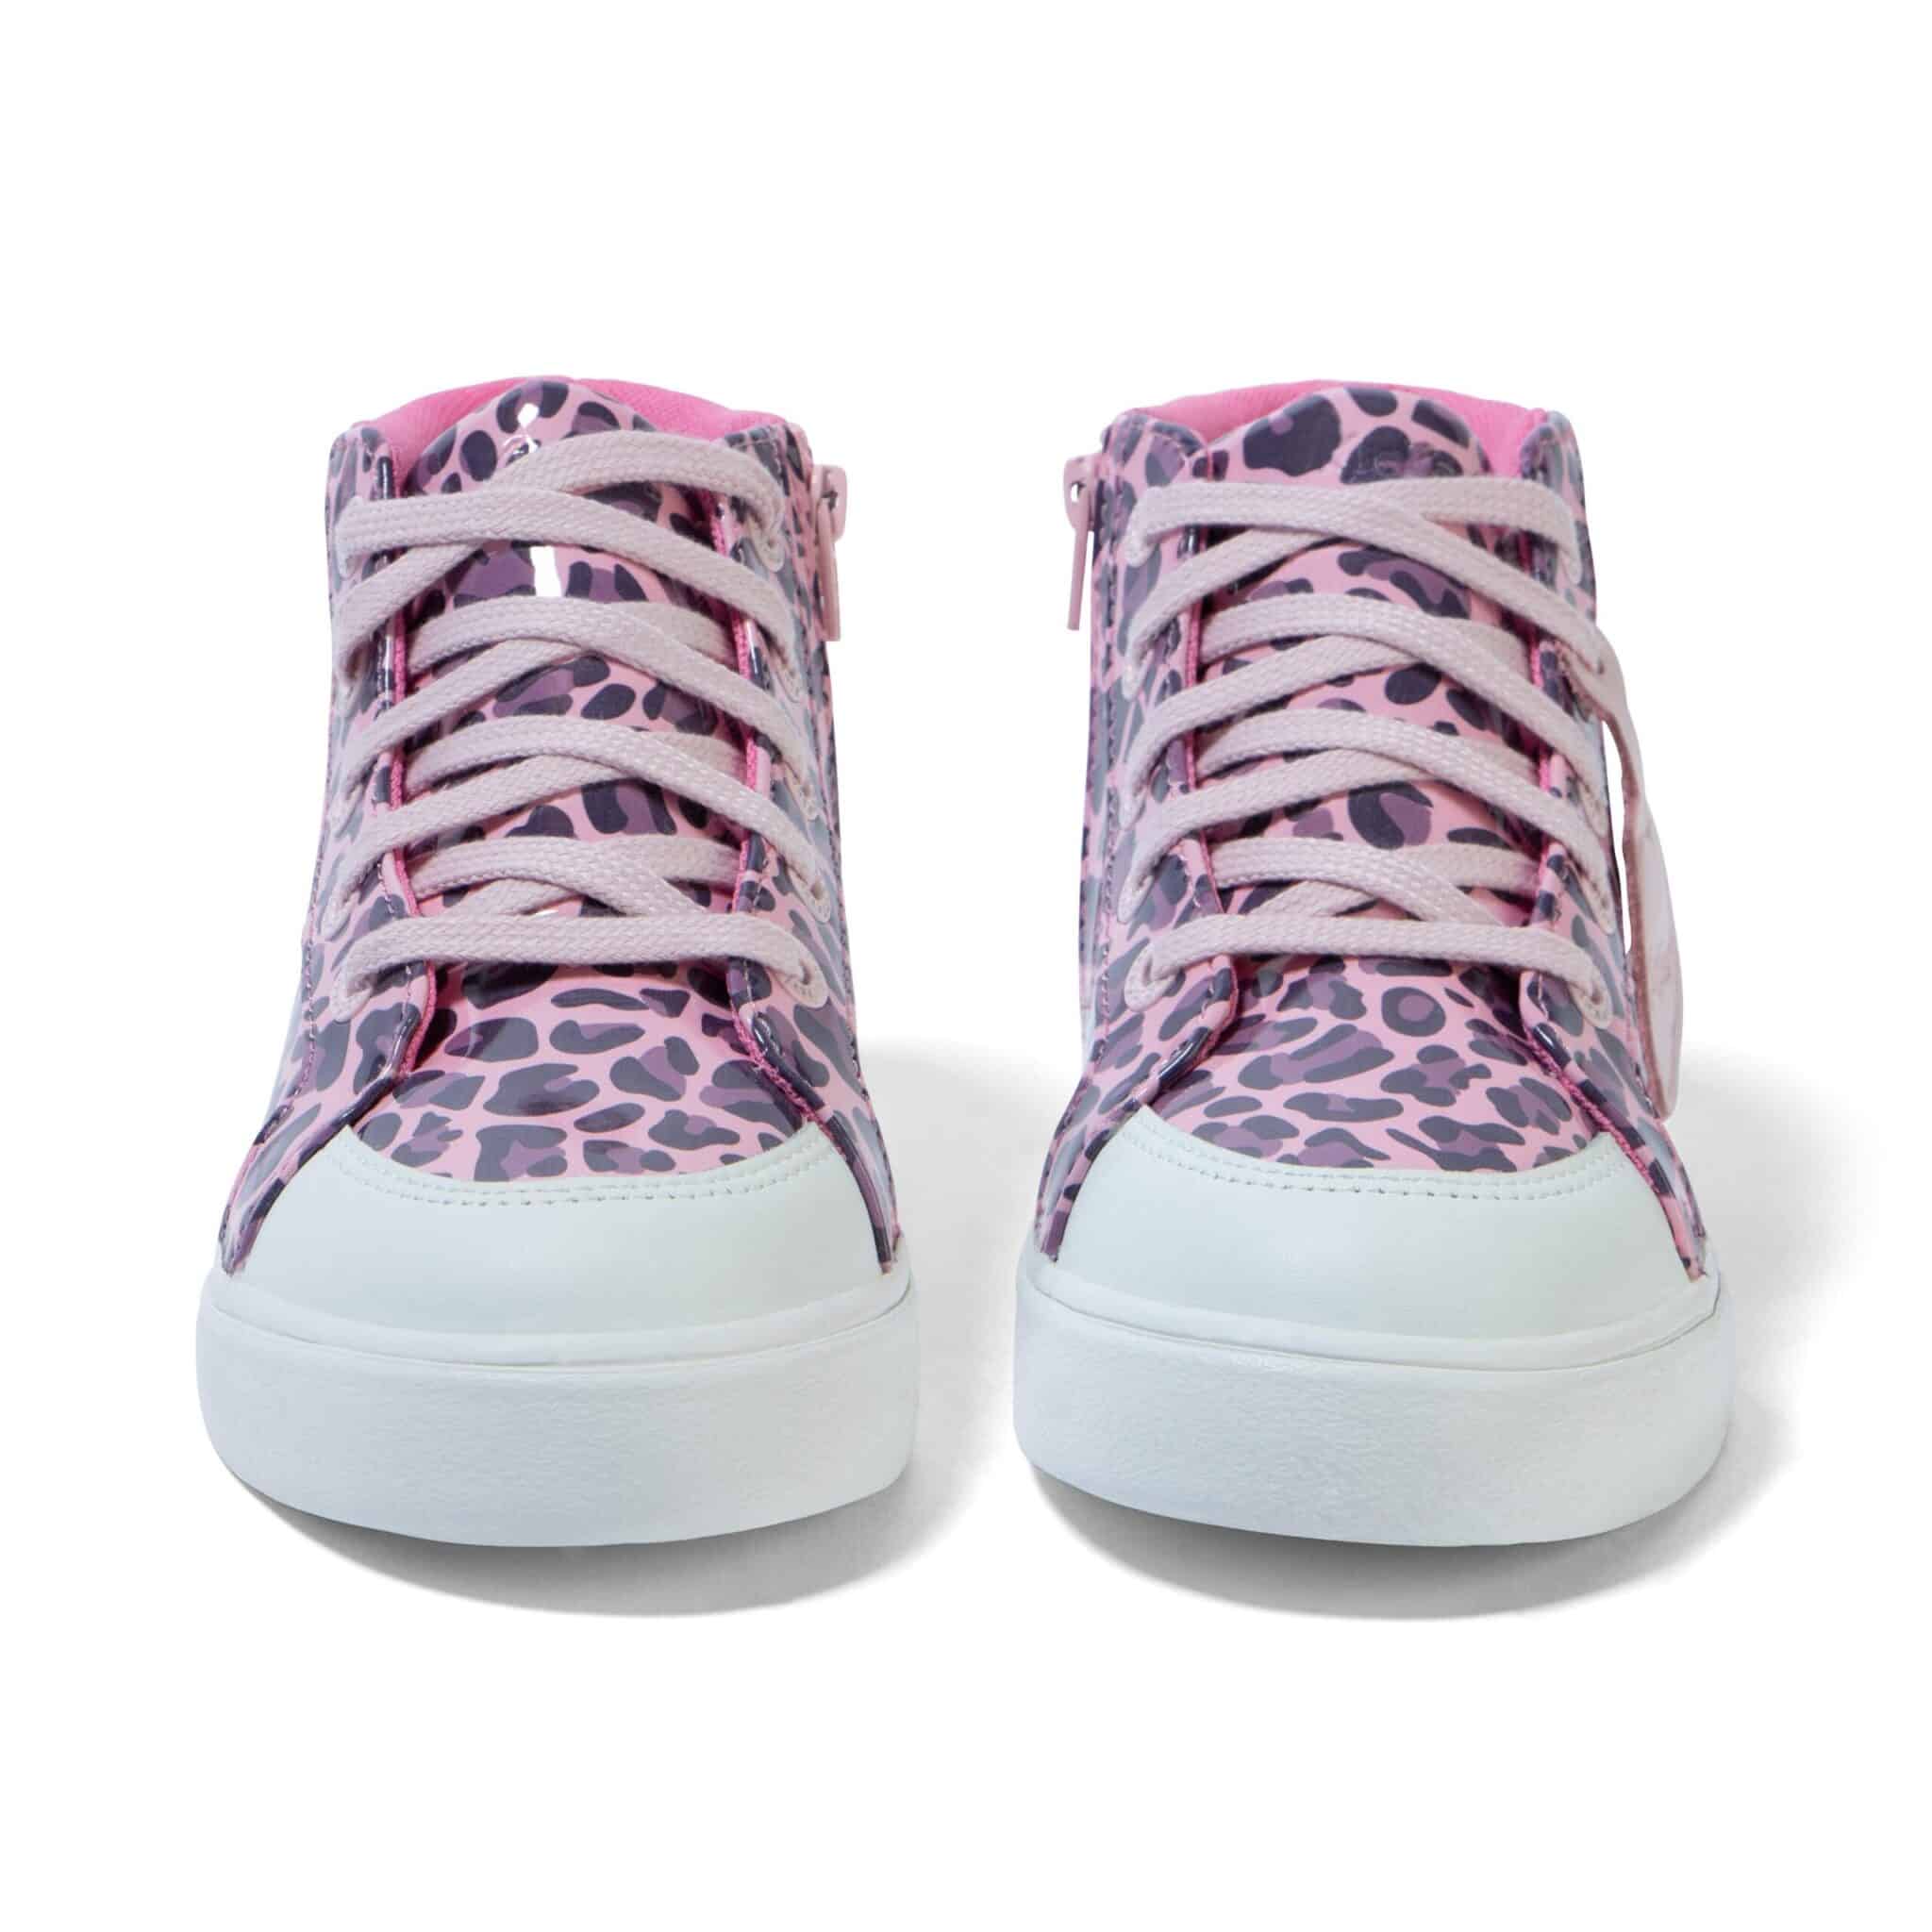 girls kickers leopard print patent hi top trainers top view white background